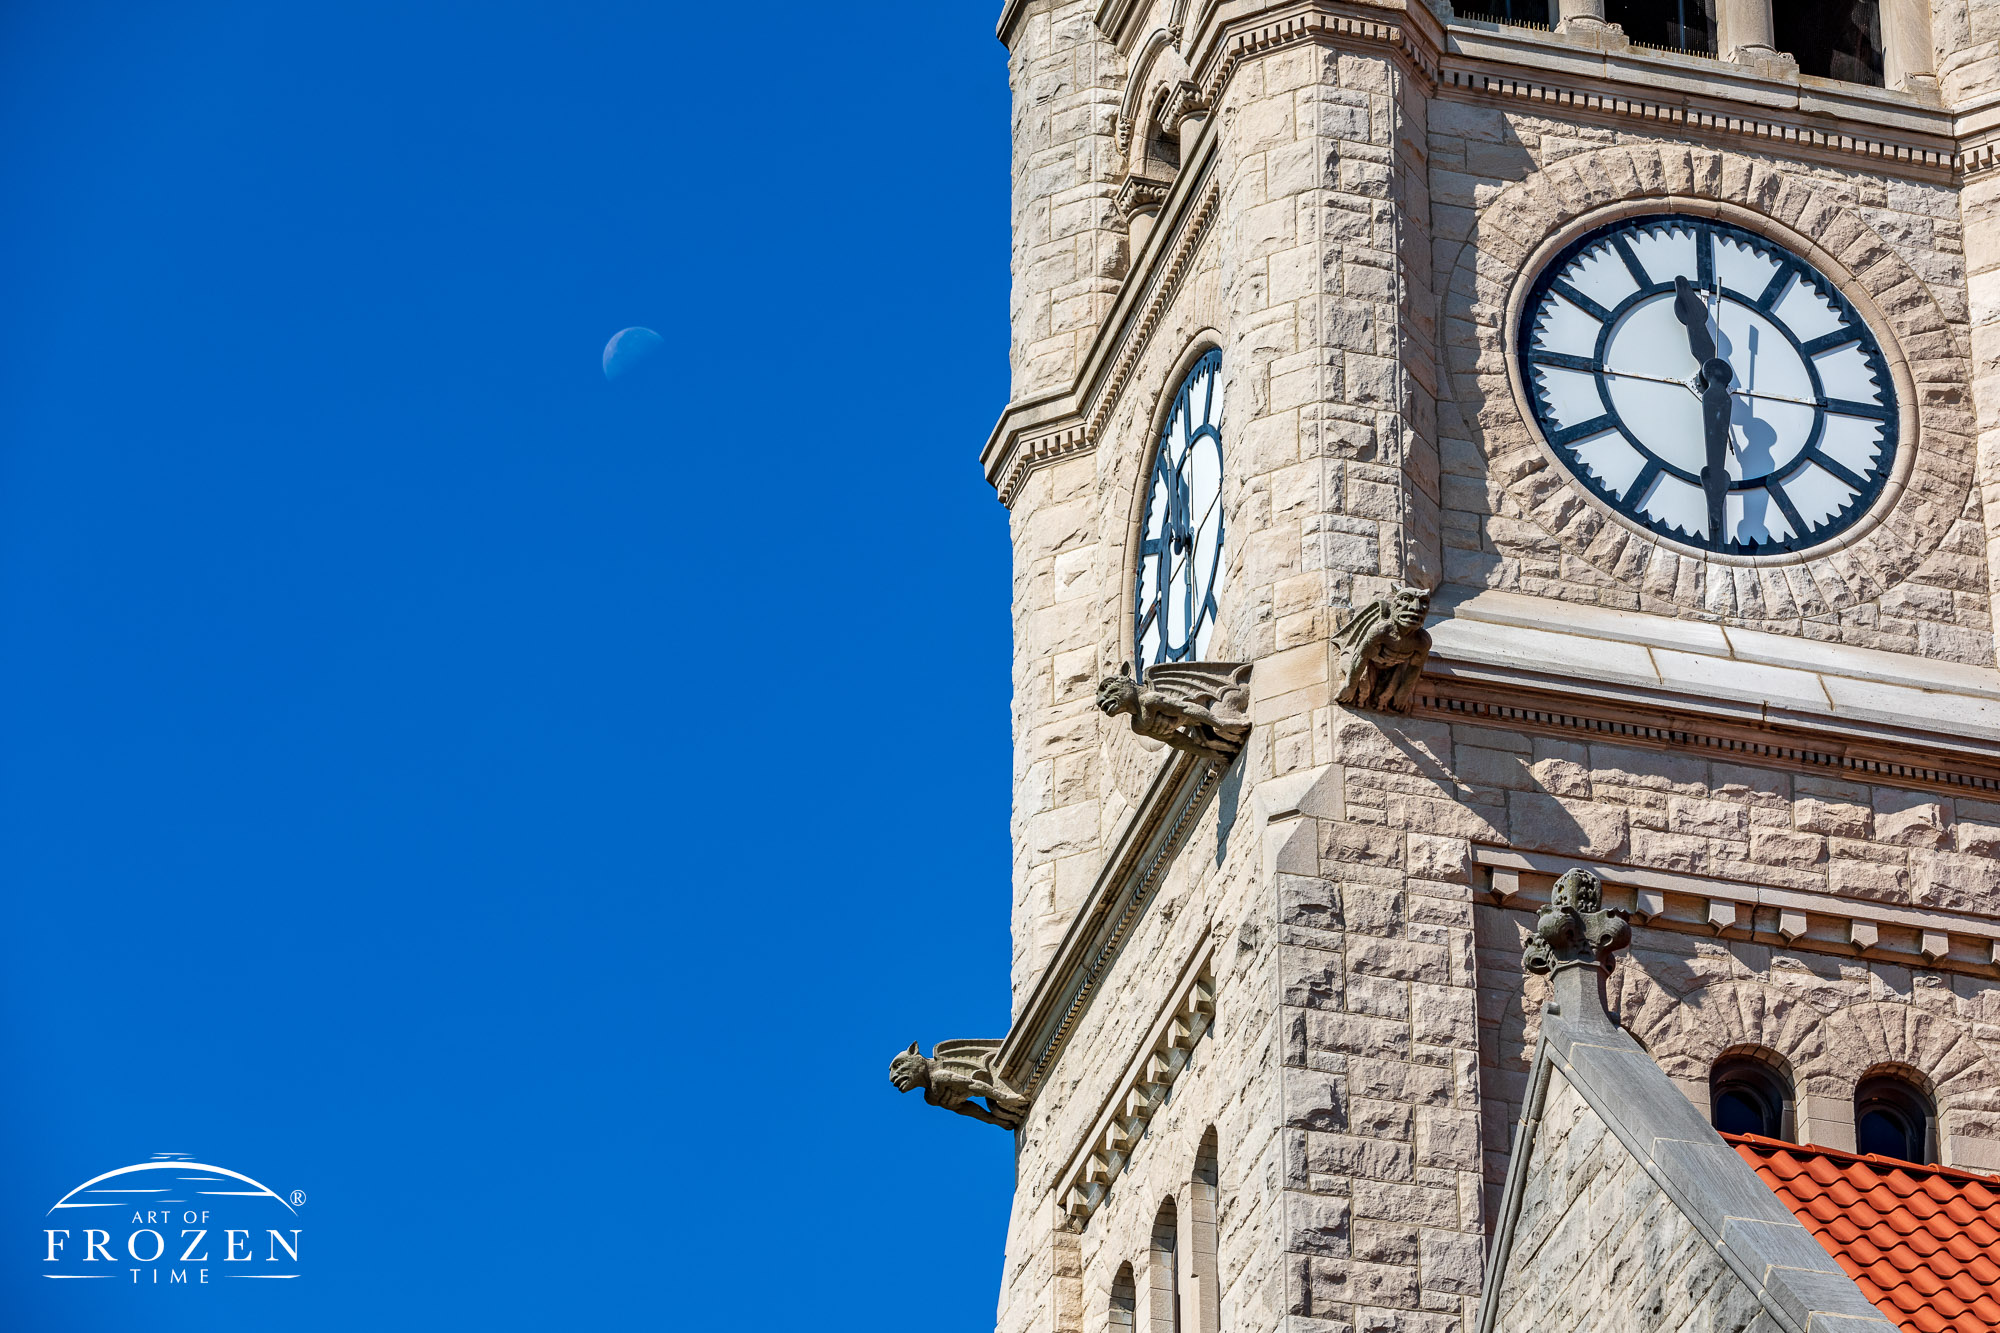 Close up of the Greene County Ohio Courthouse featuring the medieval looking Richardsonian Romanesque architecture